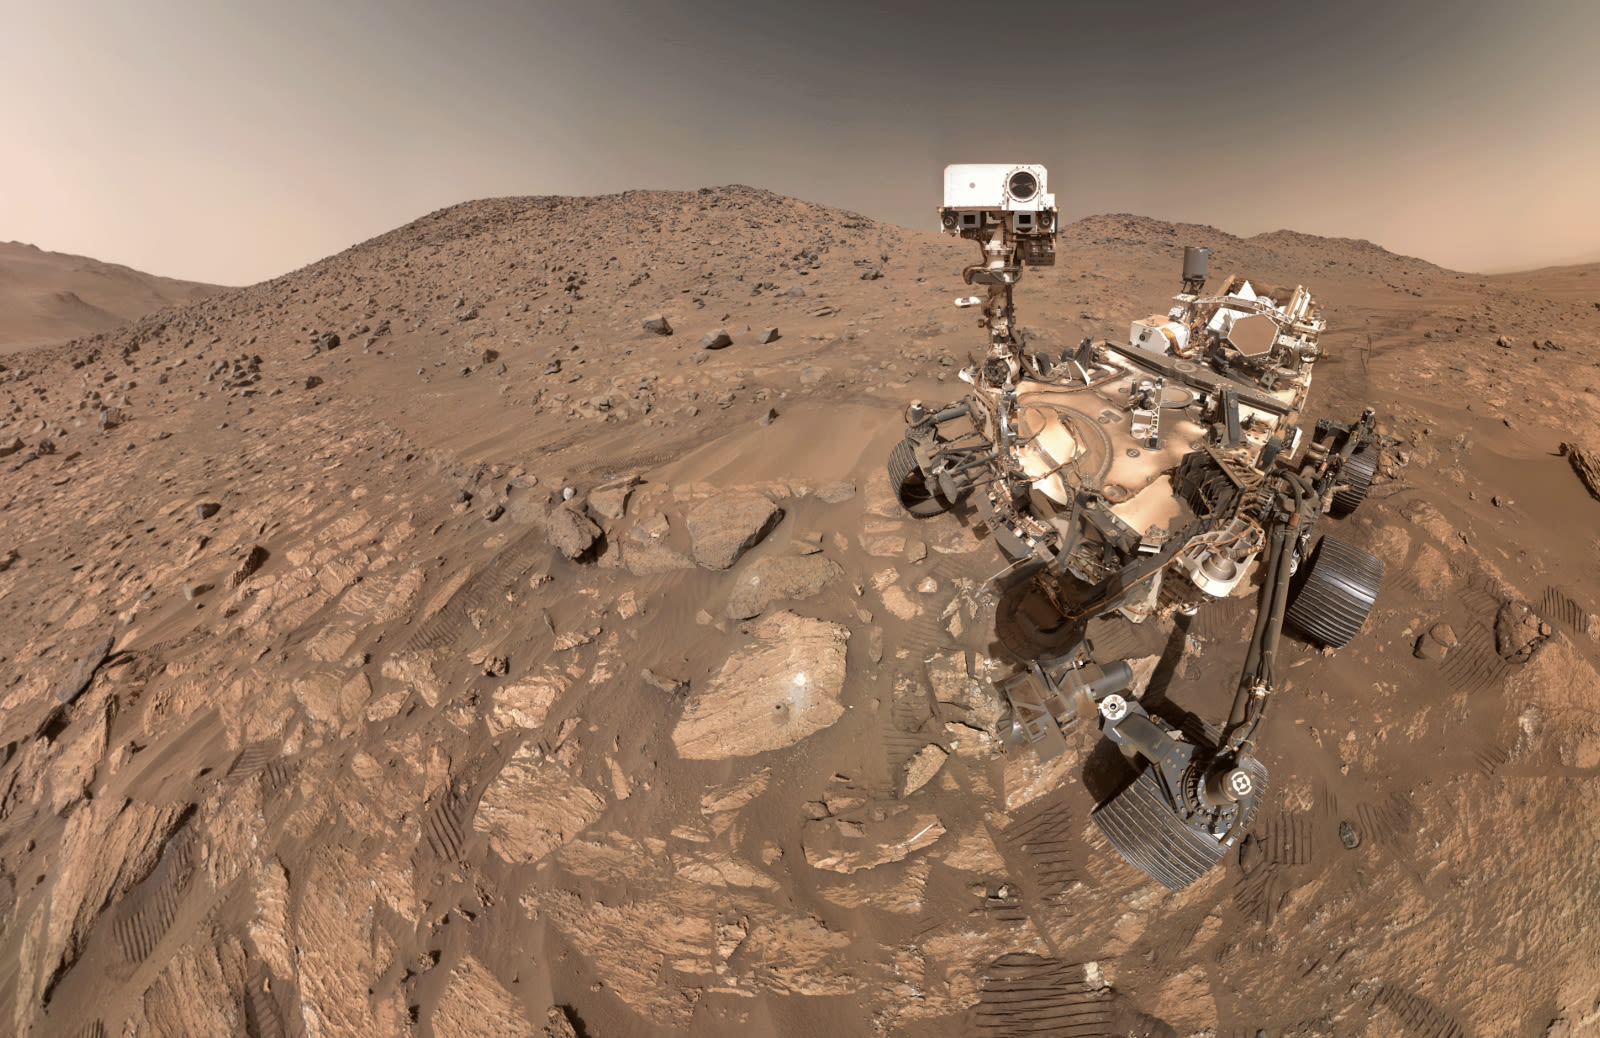 NASA's Perseverance rover found a rock on Mars that could indicate ancient life